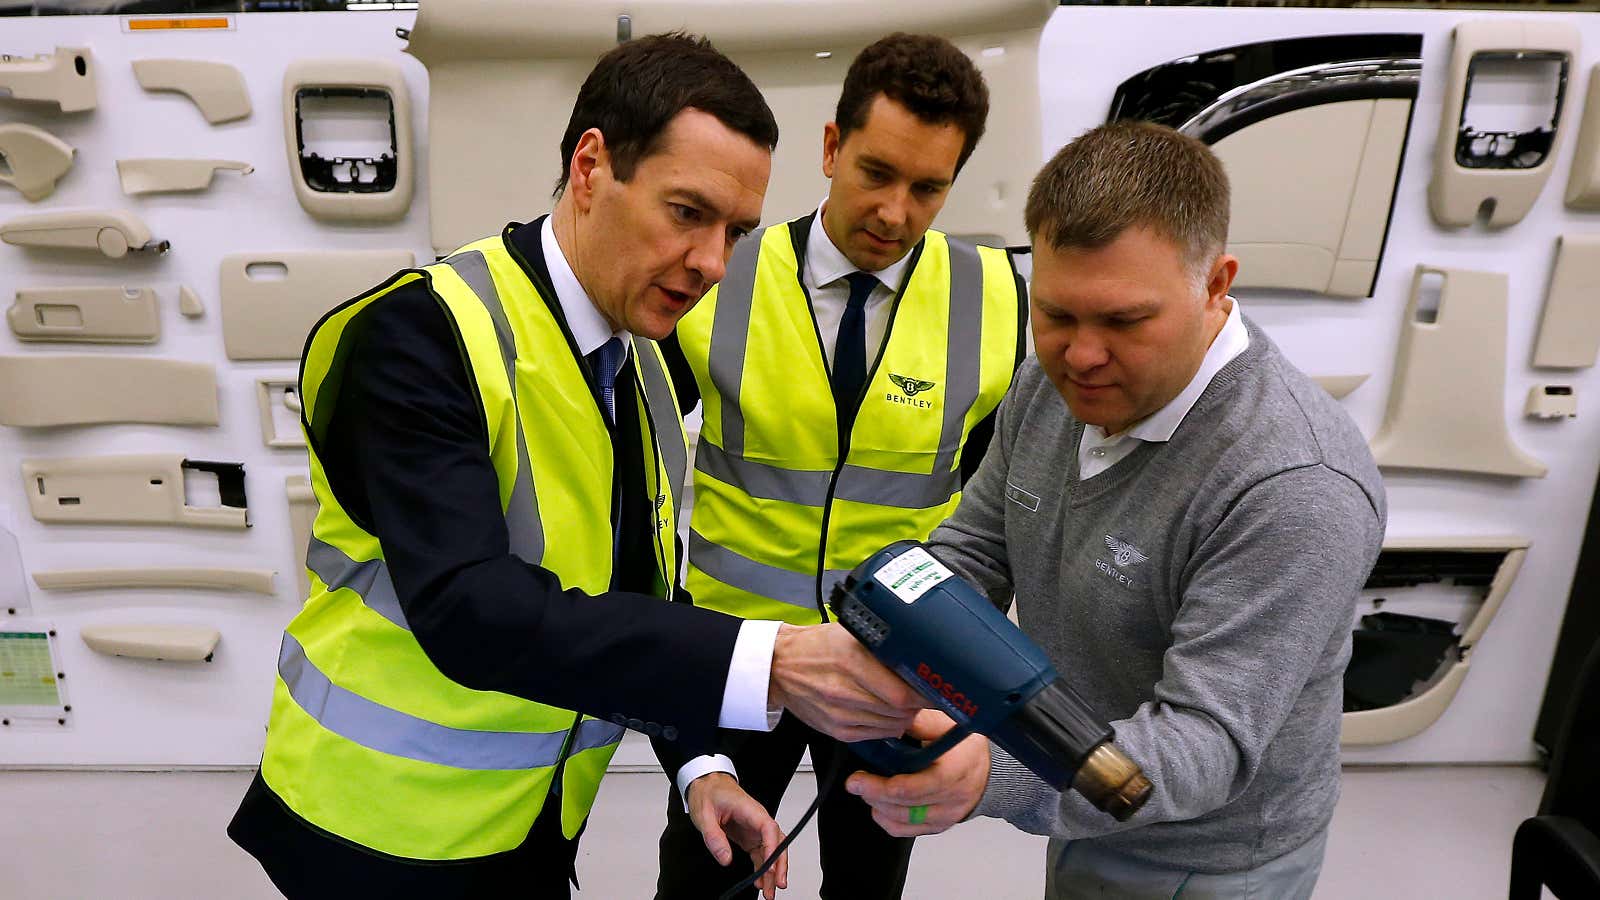 George Osborne, left, is armed and ready to tax.